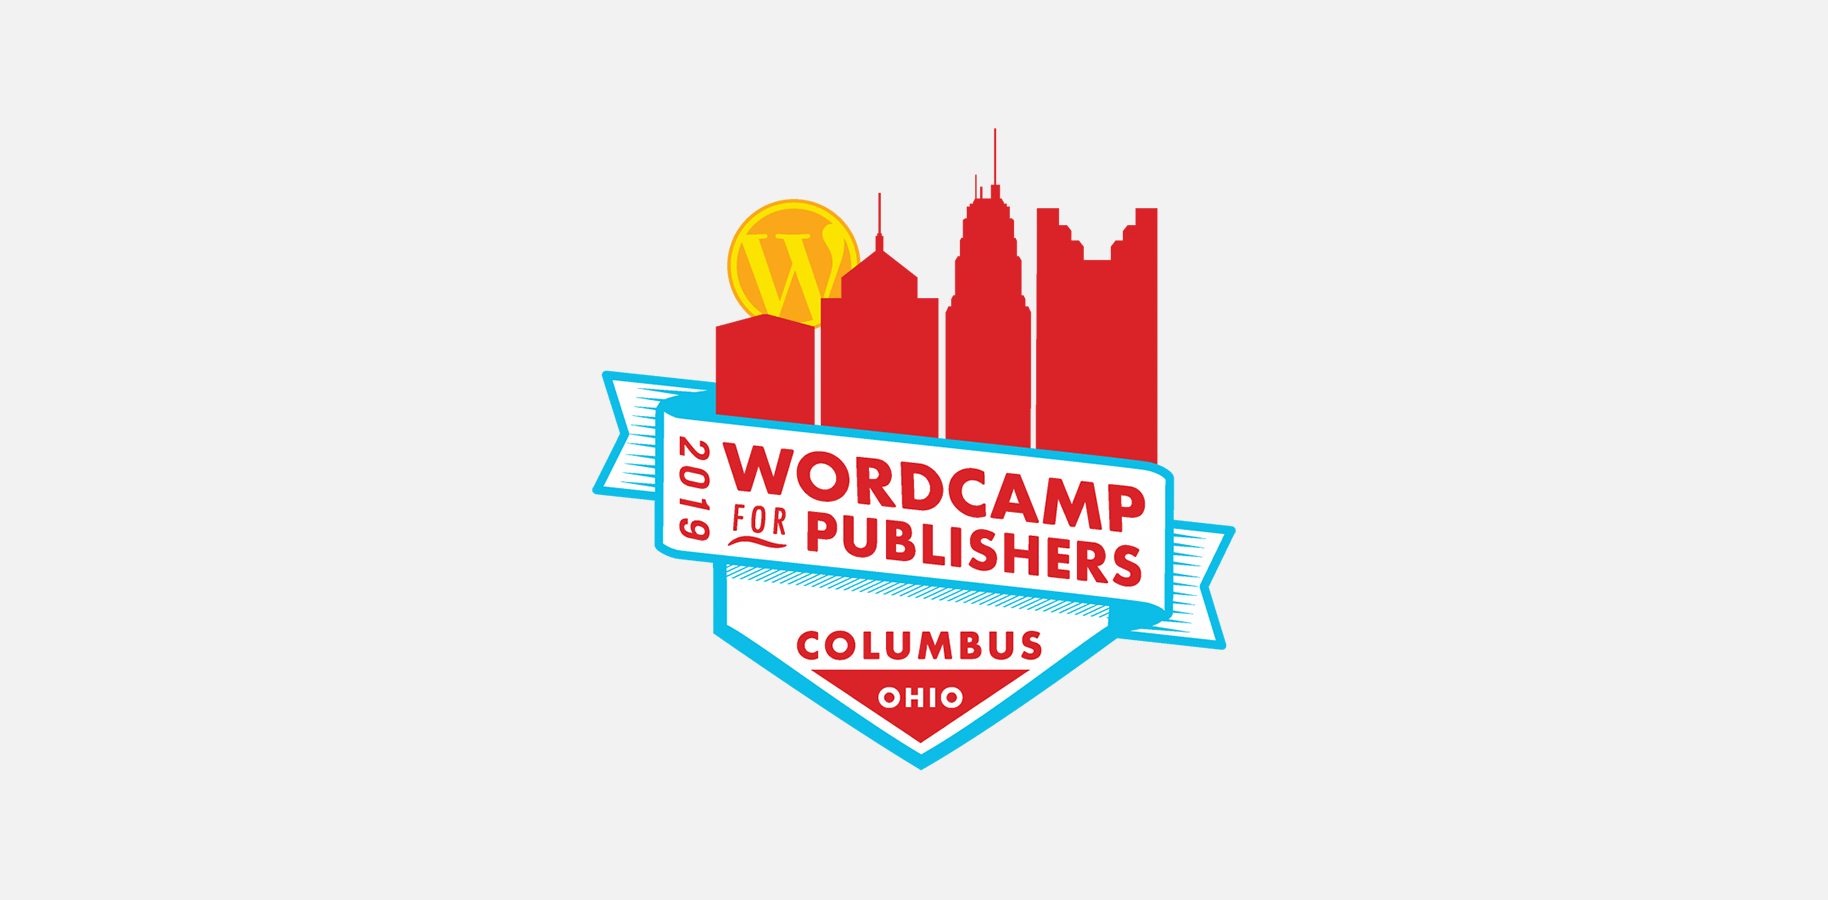 Supporting the WordPress community at #WCPub